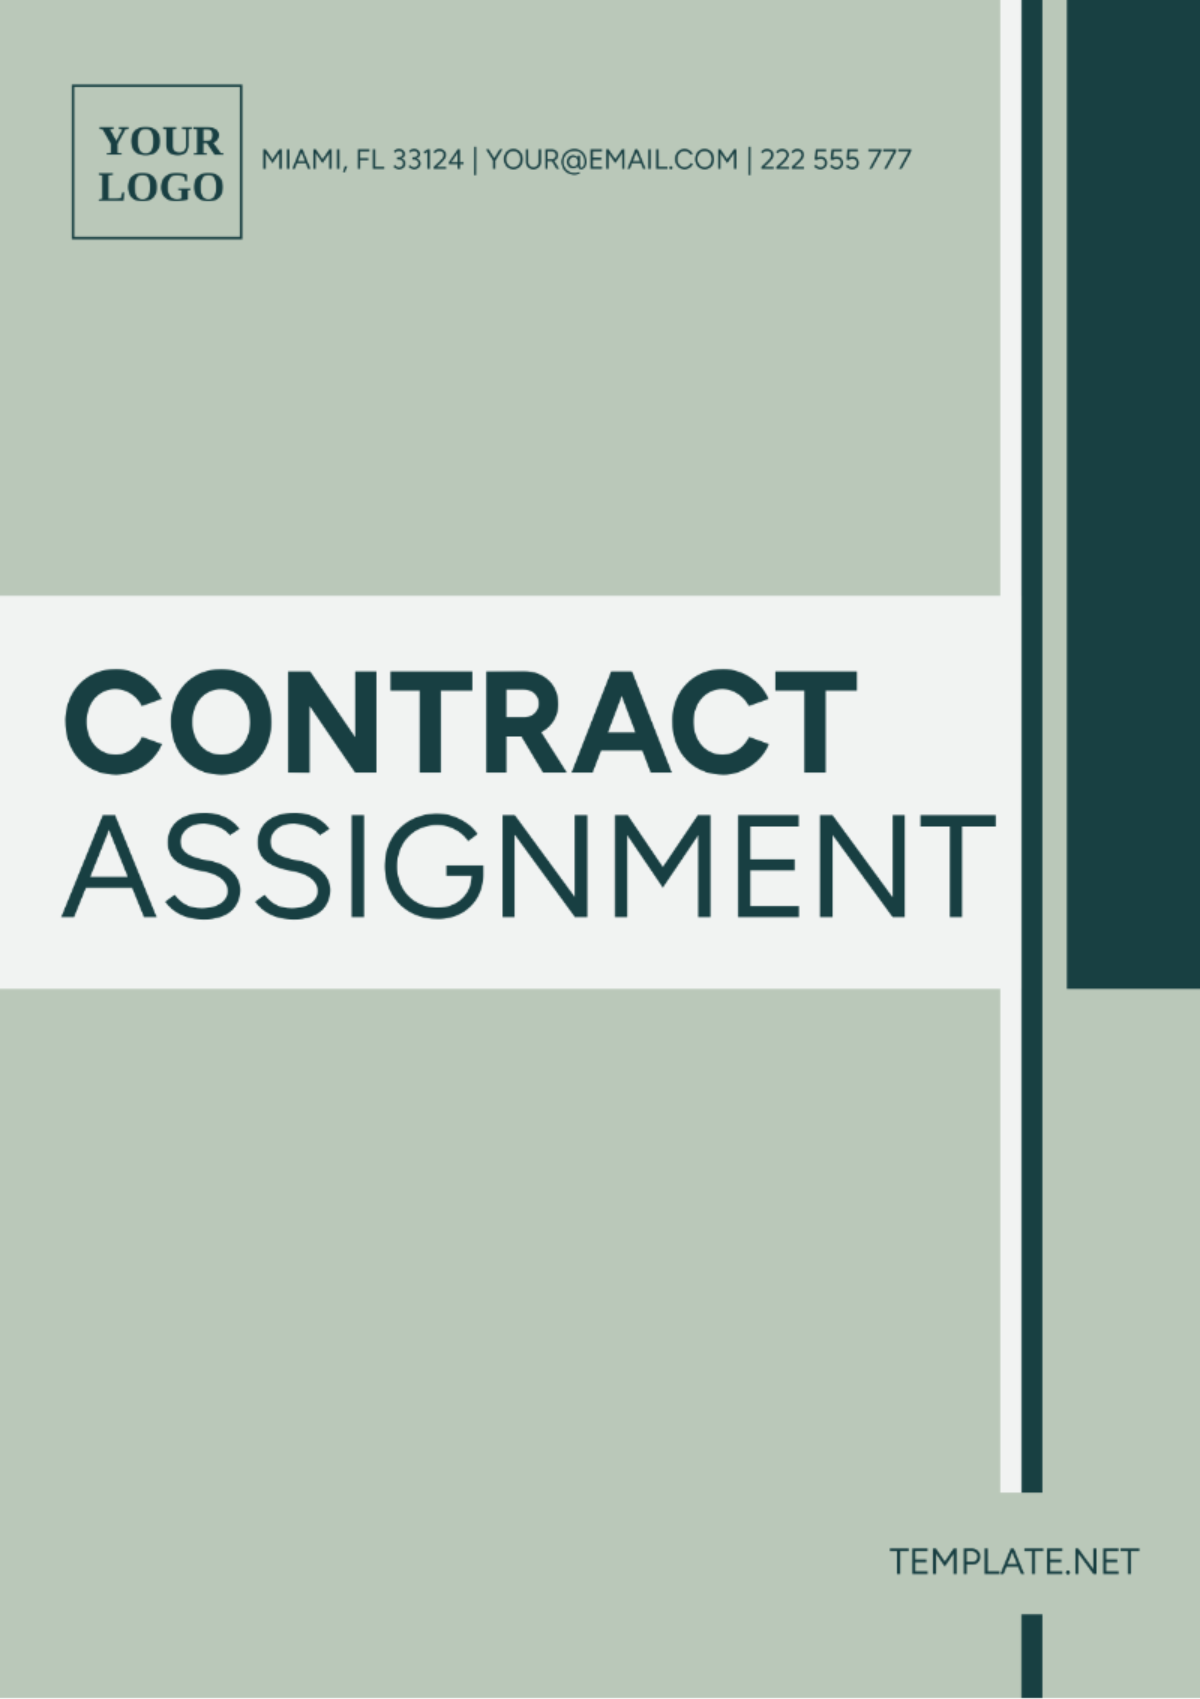 Contract Assignment Template